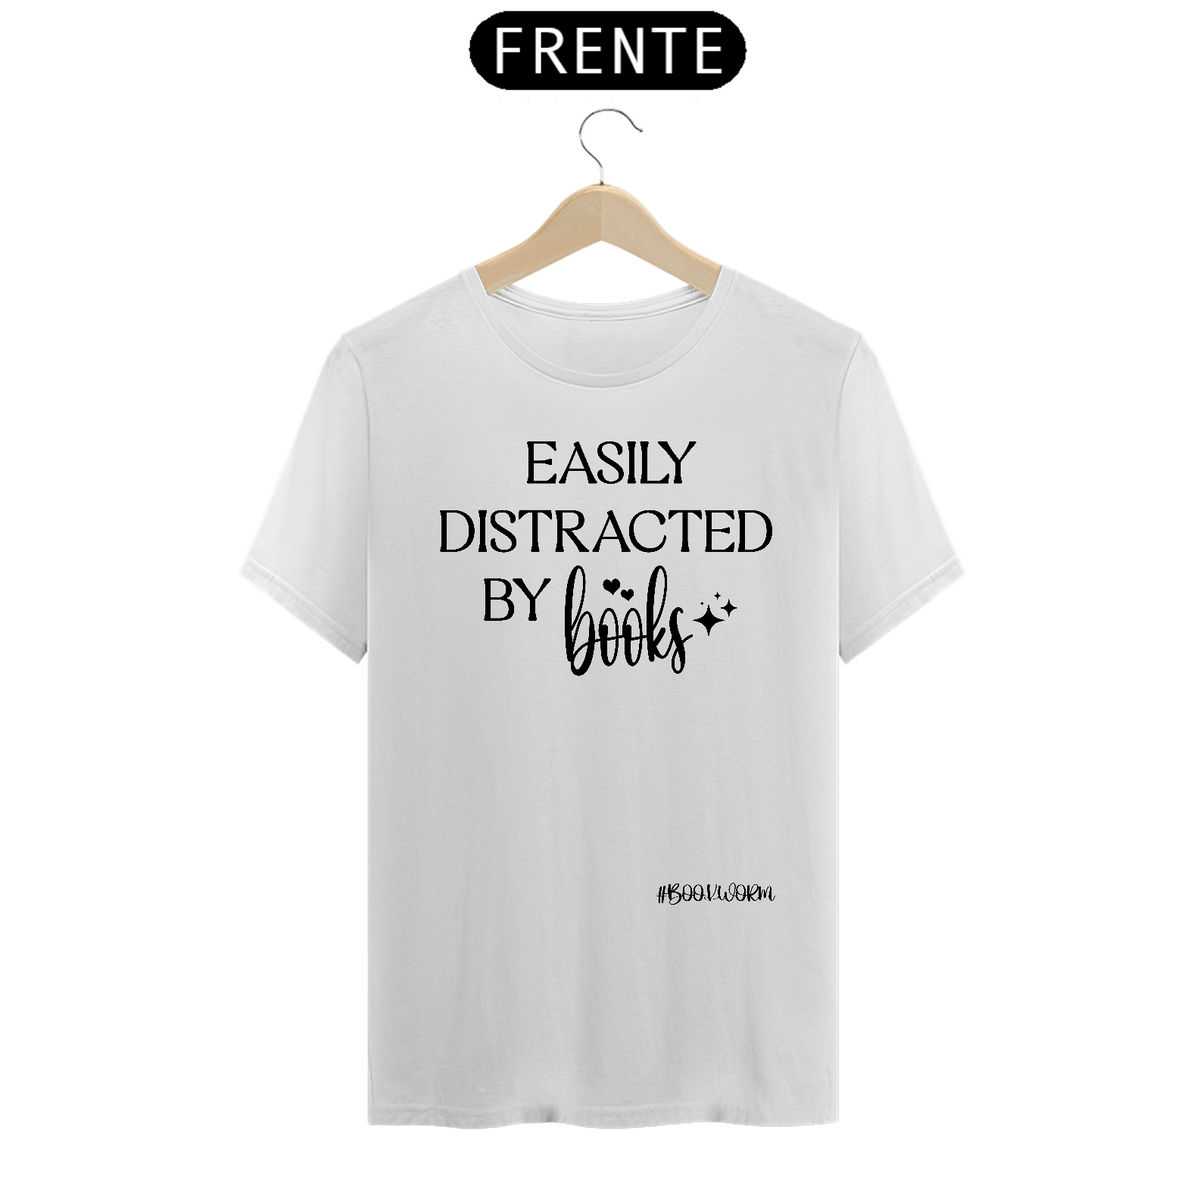 Nome do produto: Camiseta Easily Distracted by Books